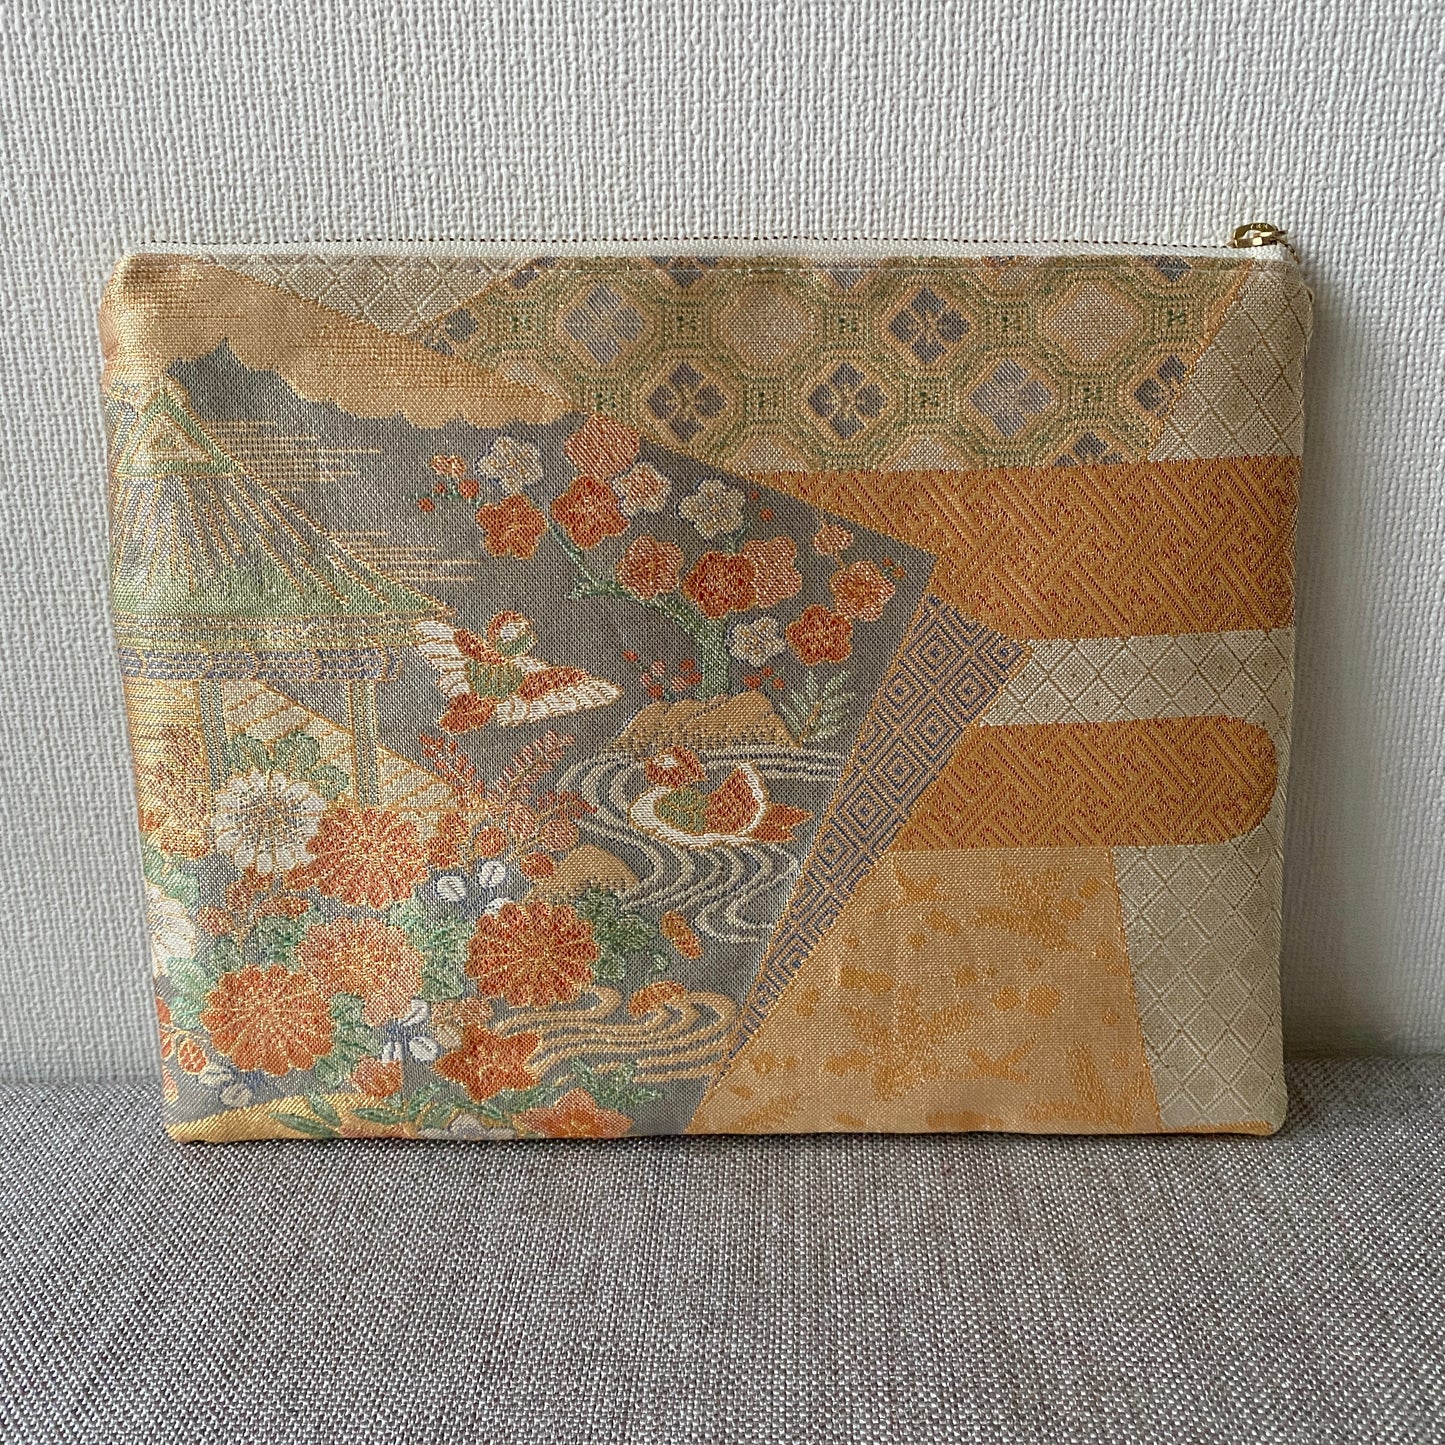 Flat silk Obi pouch, Medium size, Handcrafted, Upcycled, #3002